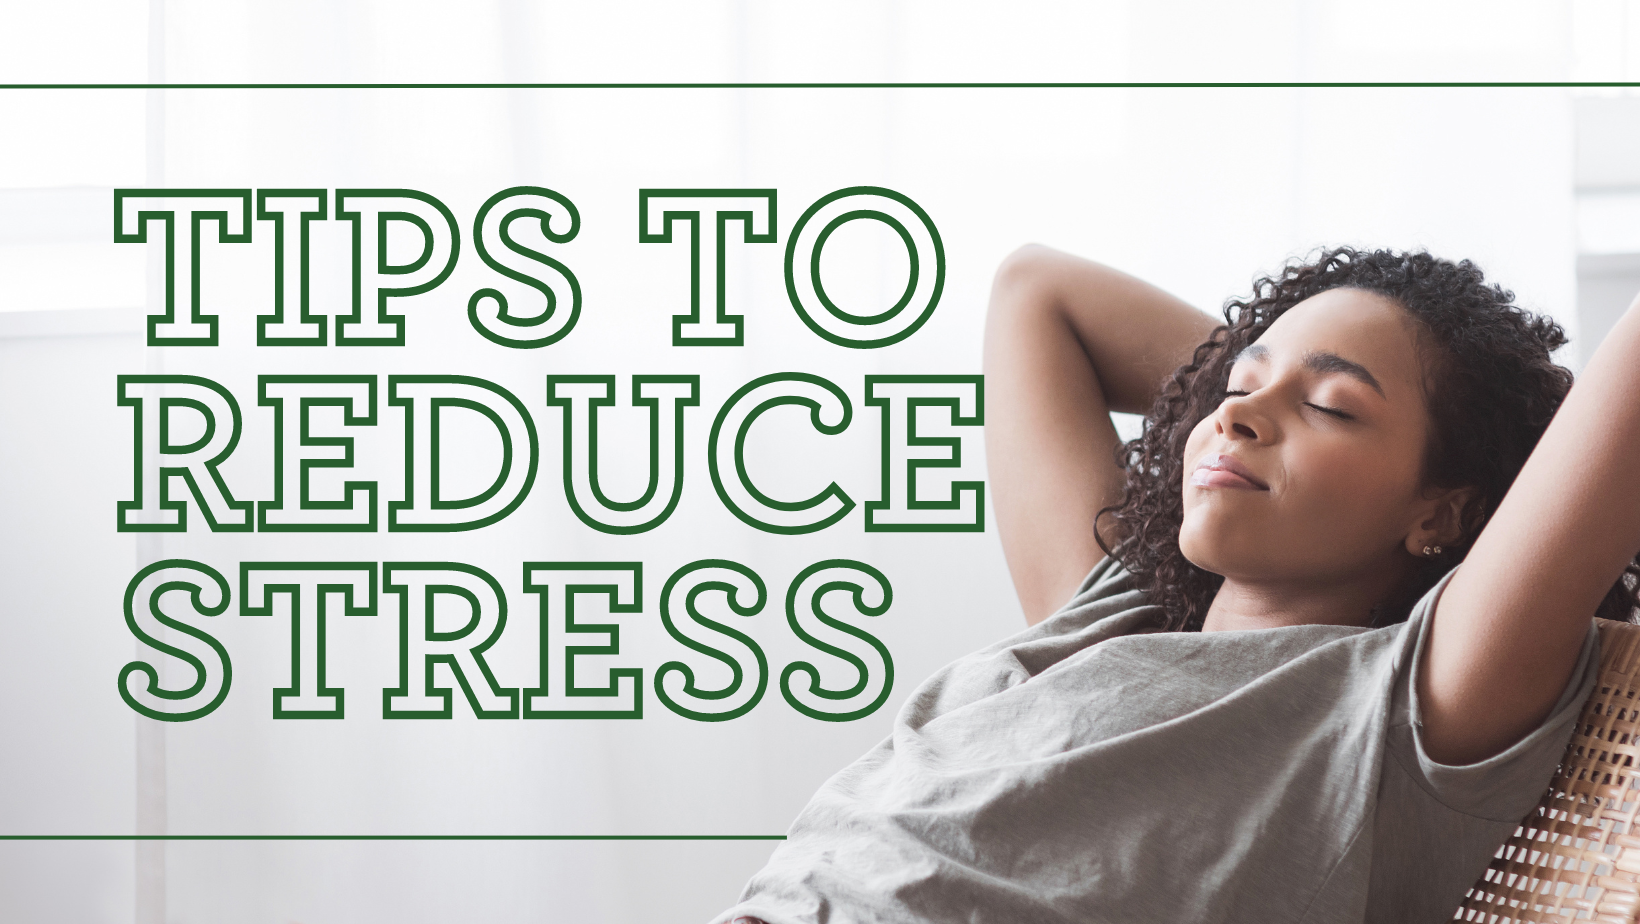 Tips to Reduce Stress